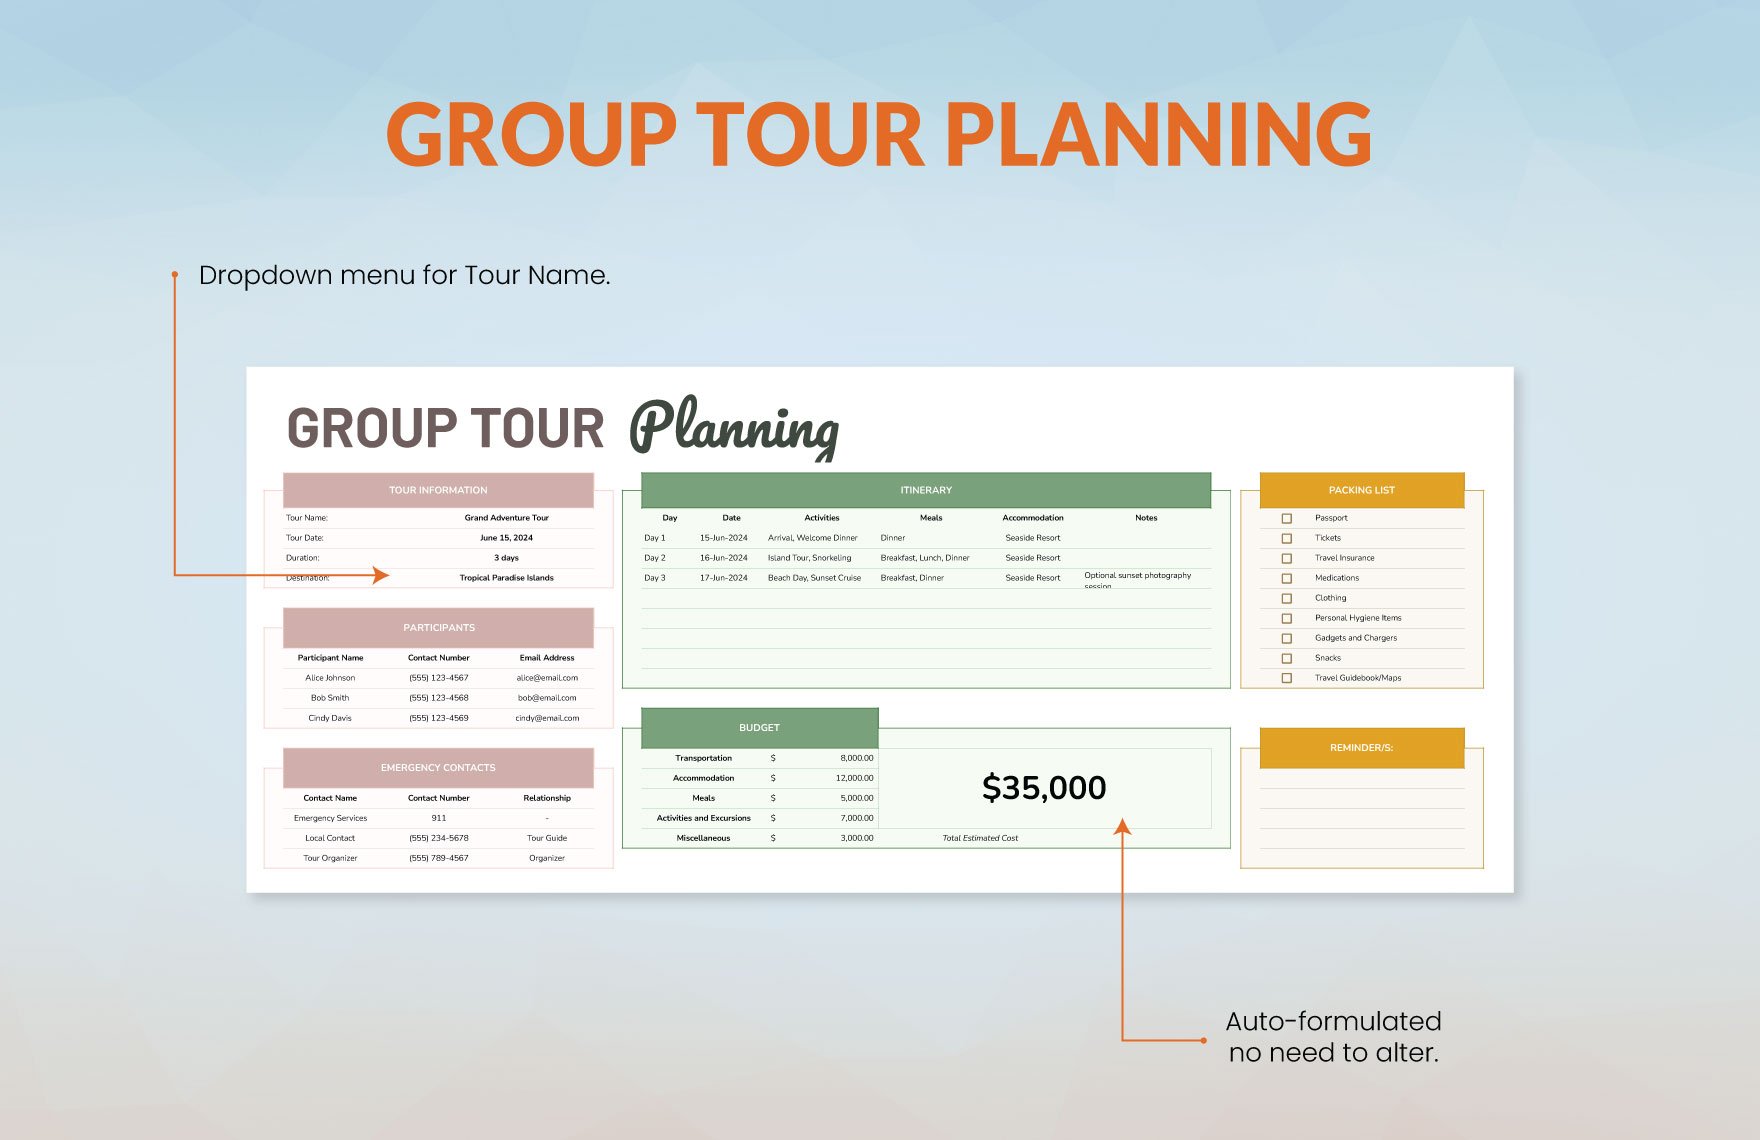 Group Tour Planning Template